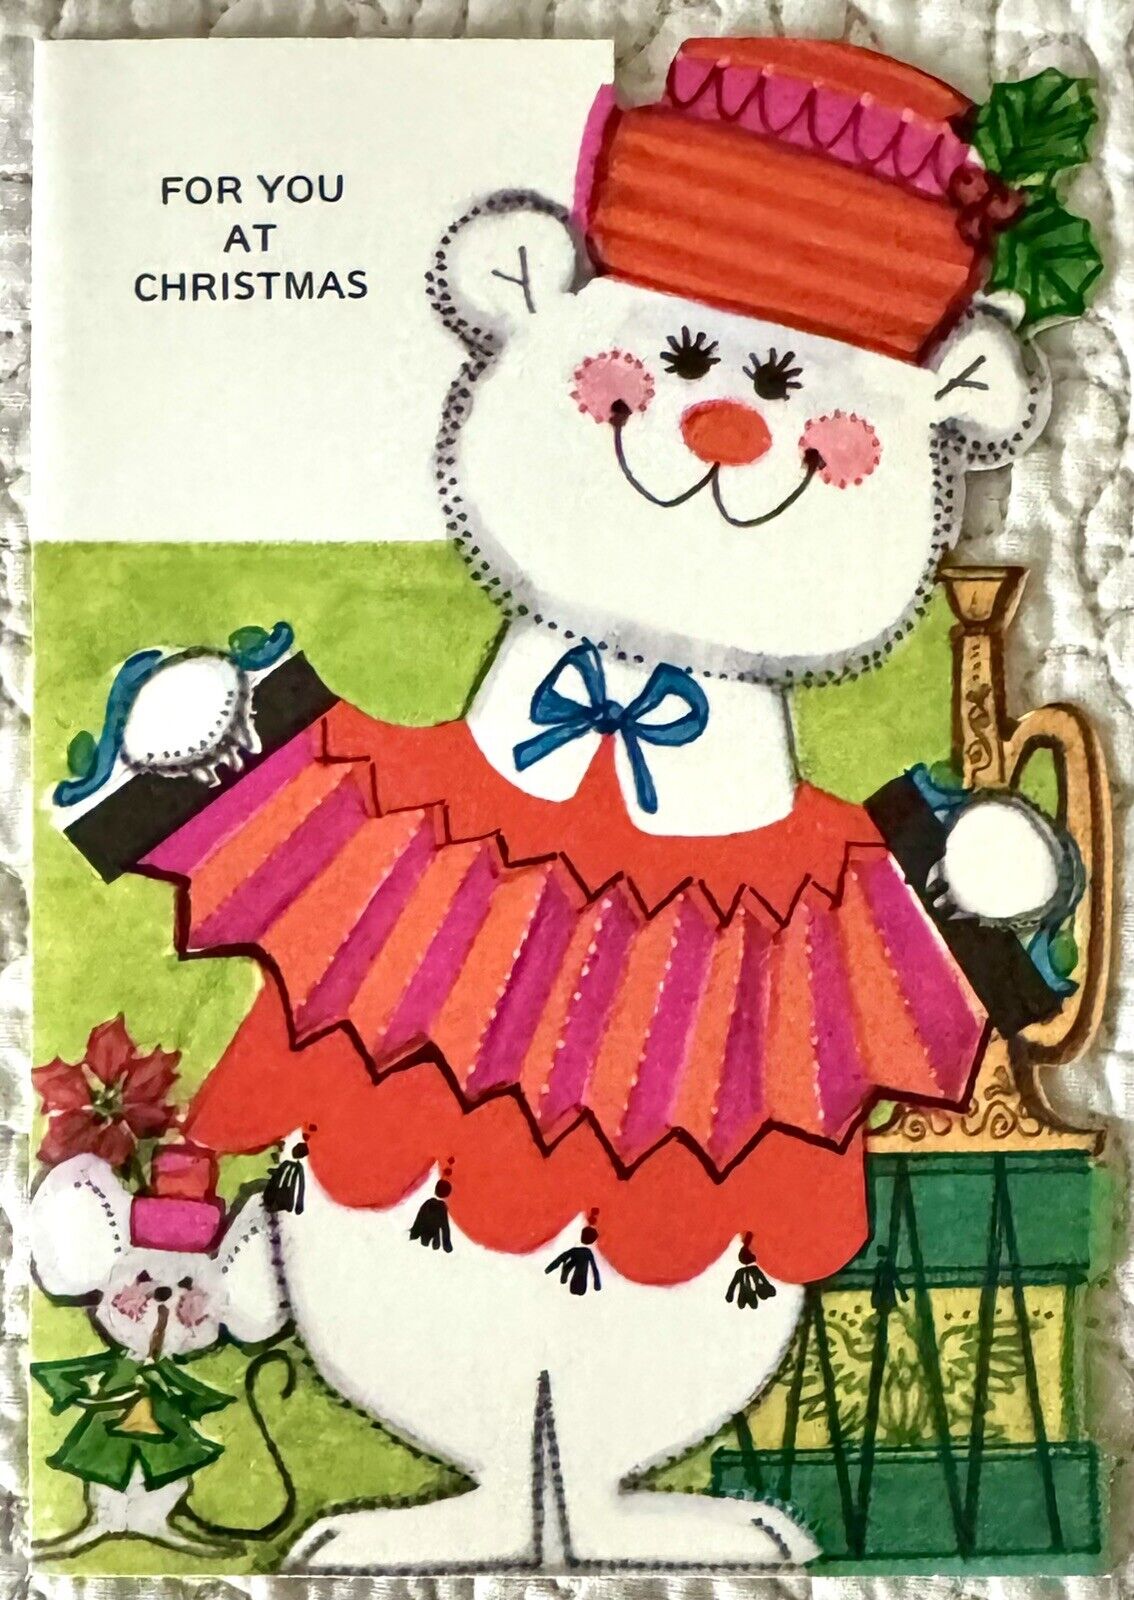 Unused Christmas Bear Accordion Mouse Music Vintage Greeting Card 1960s 1970s